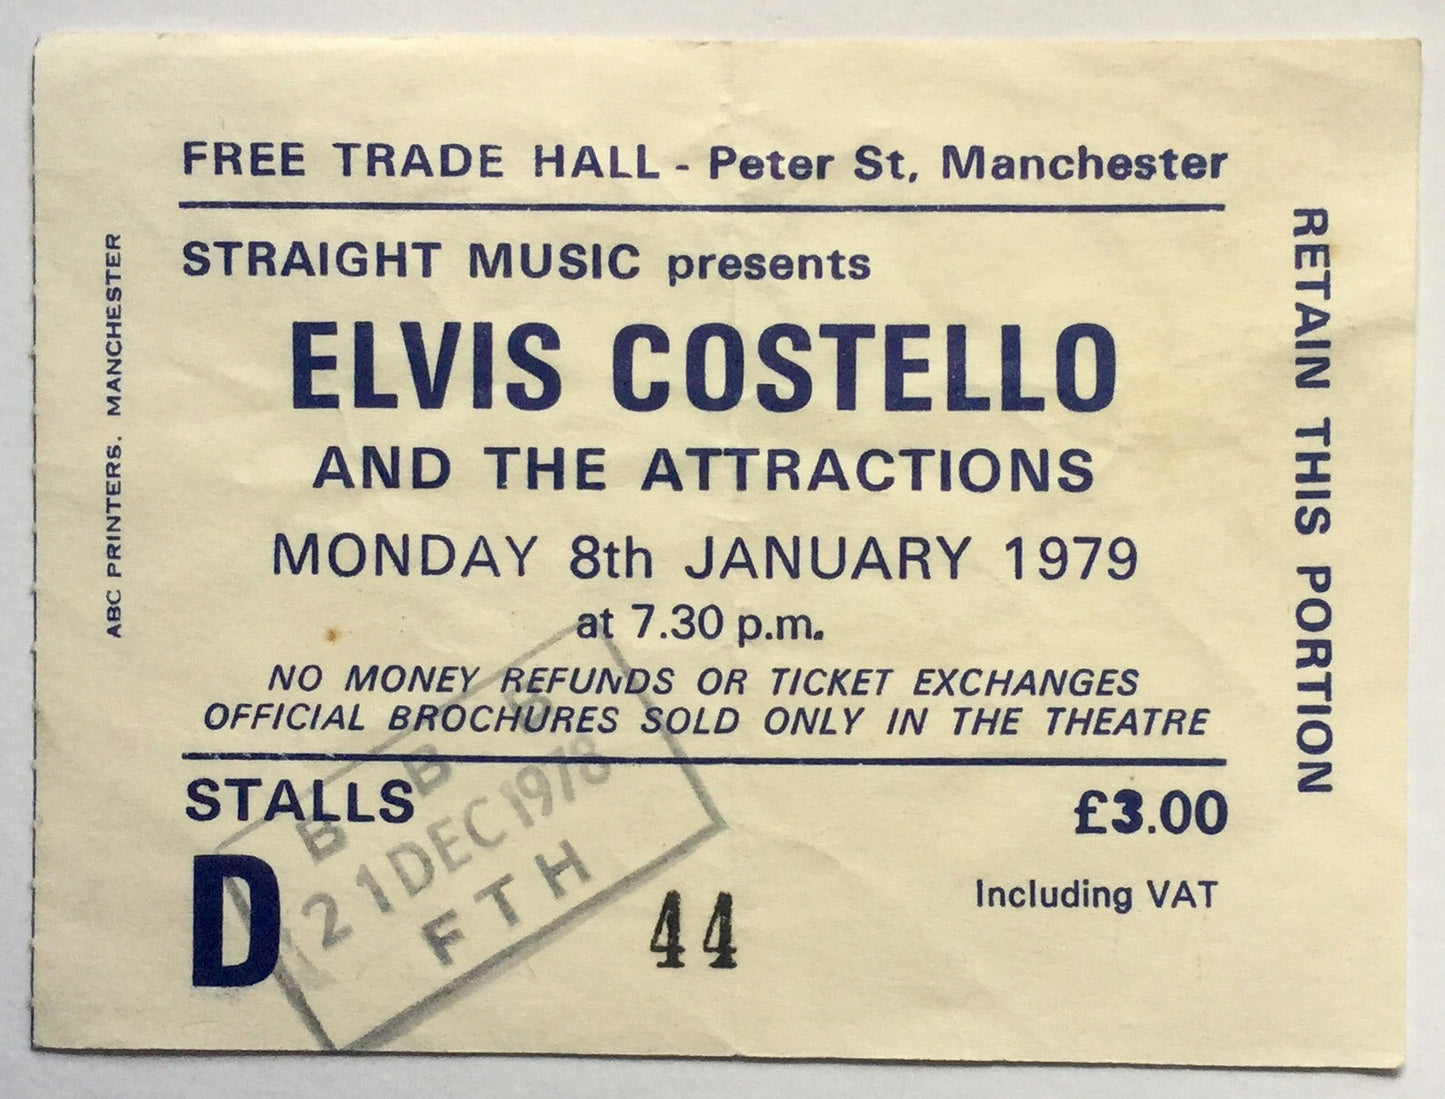 Elvis Costello Original Used Concert Ticket Free Trade Hall Manchester 8th Jan 1979